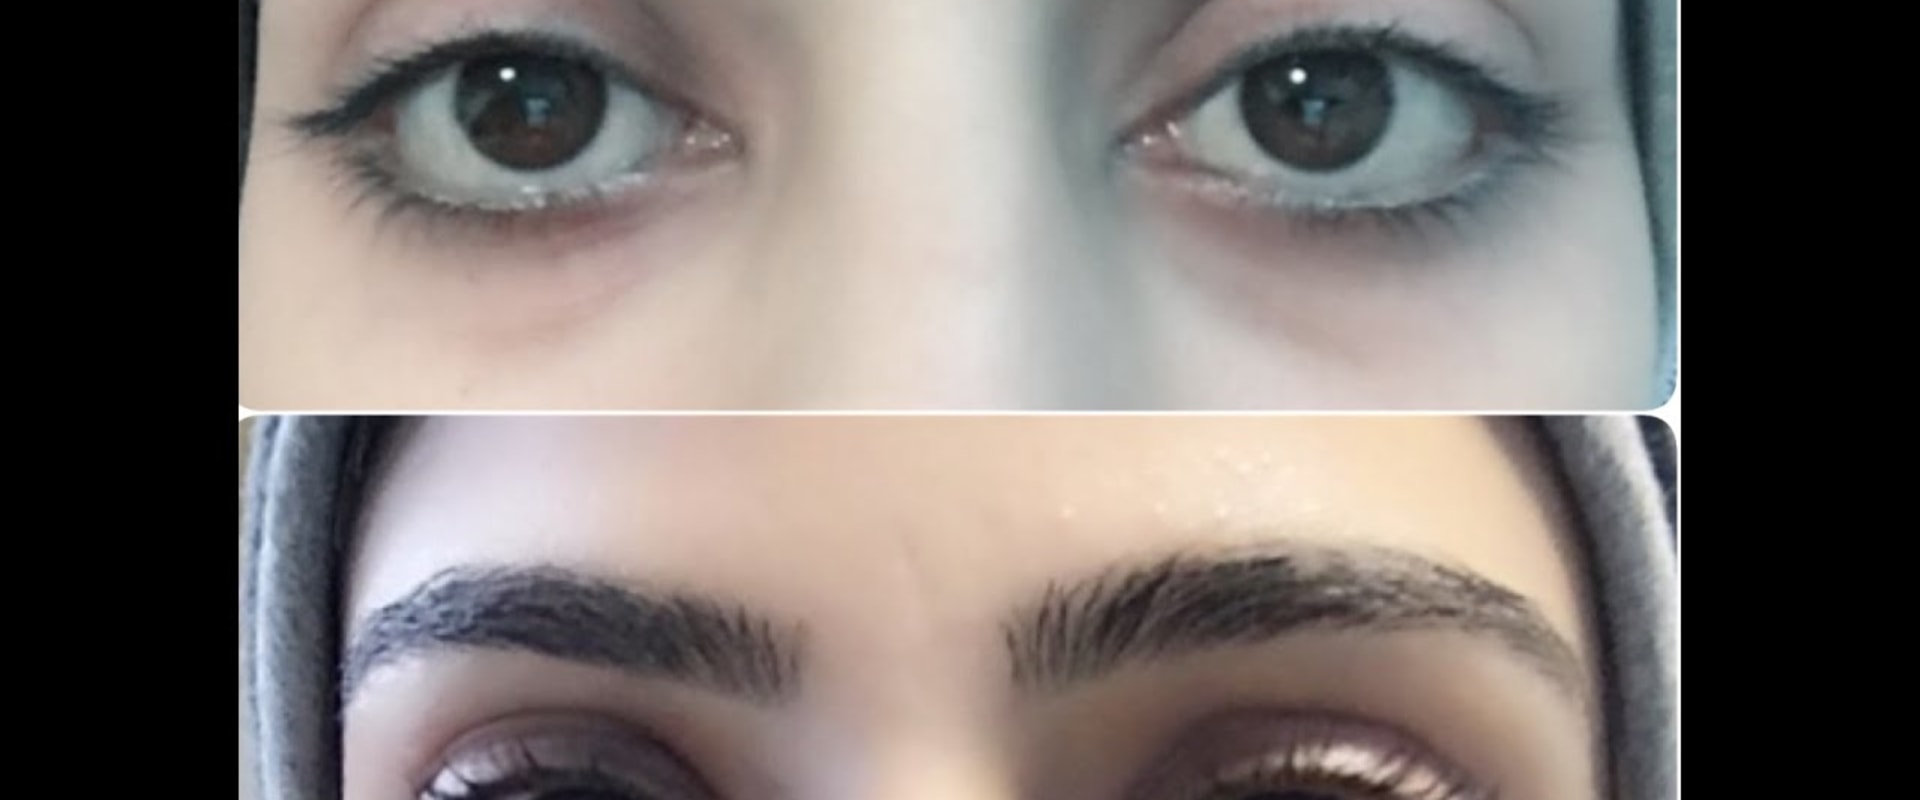 How do you get rid of an eye infection from eyelash extensions?